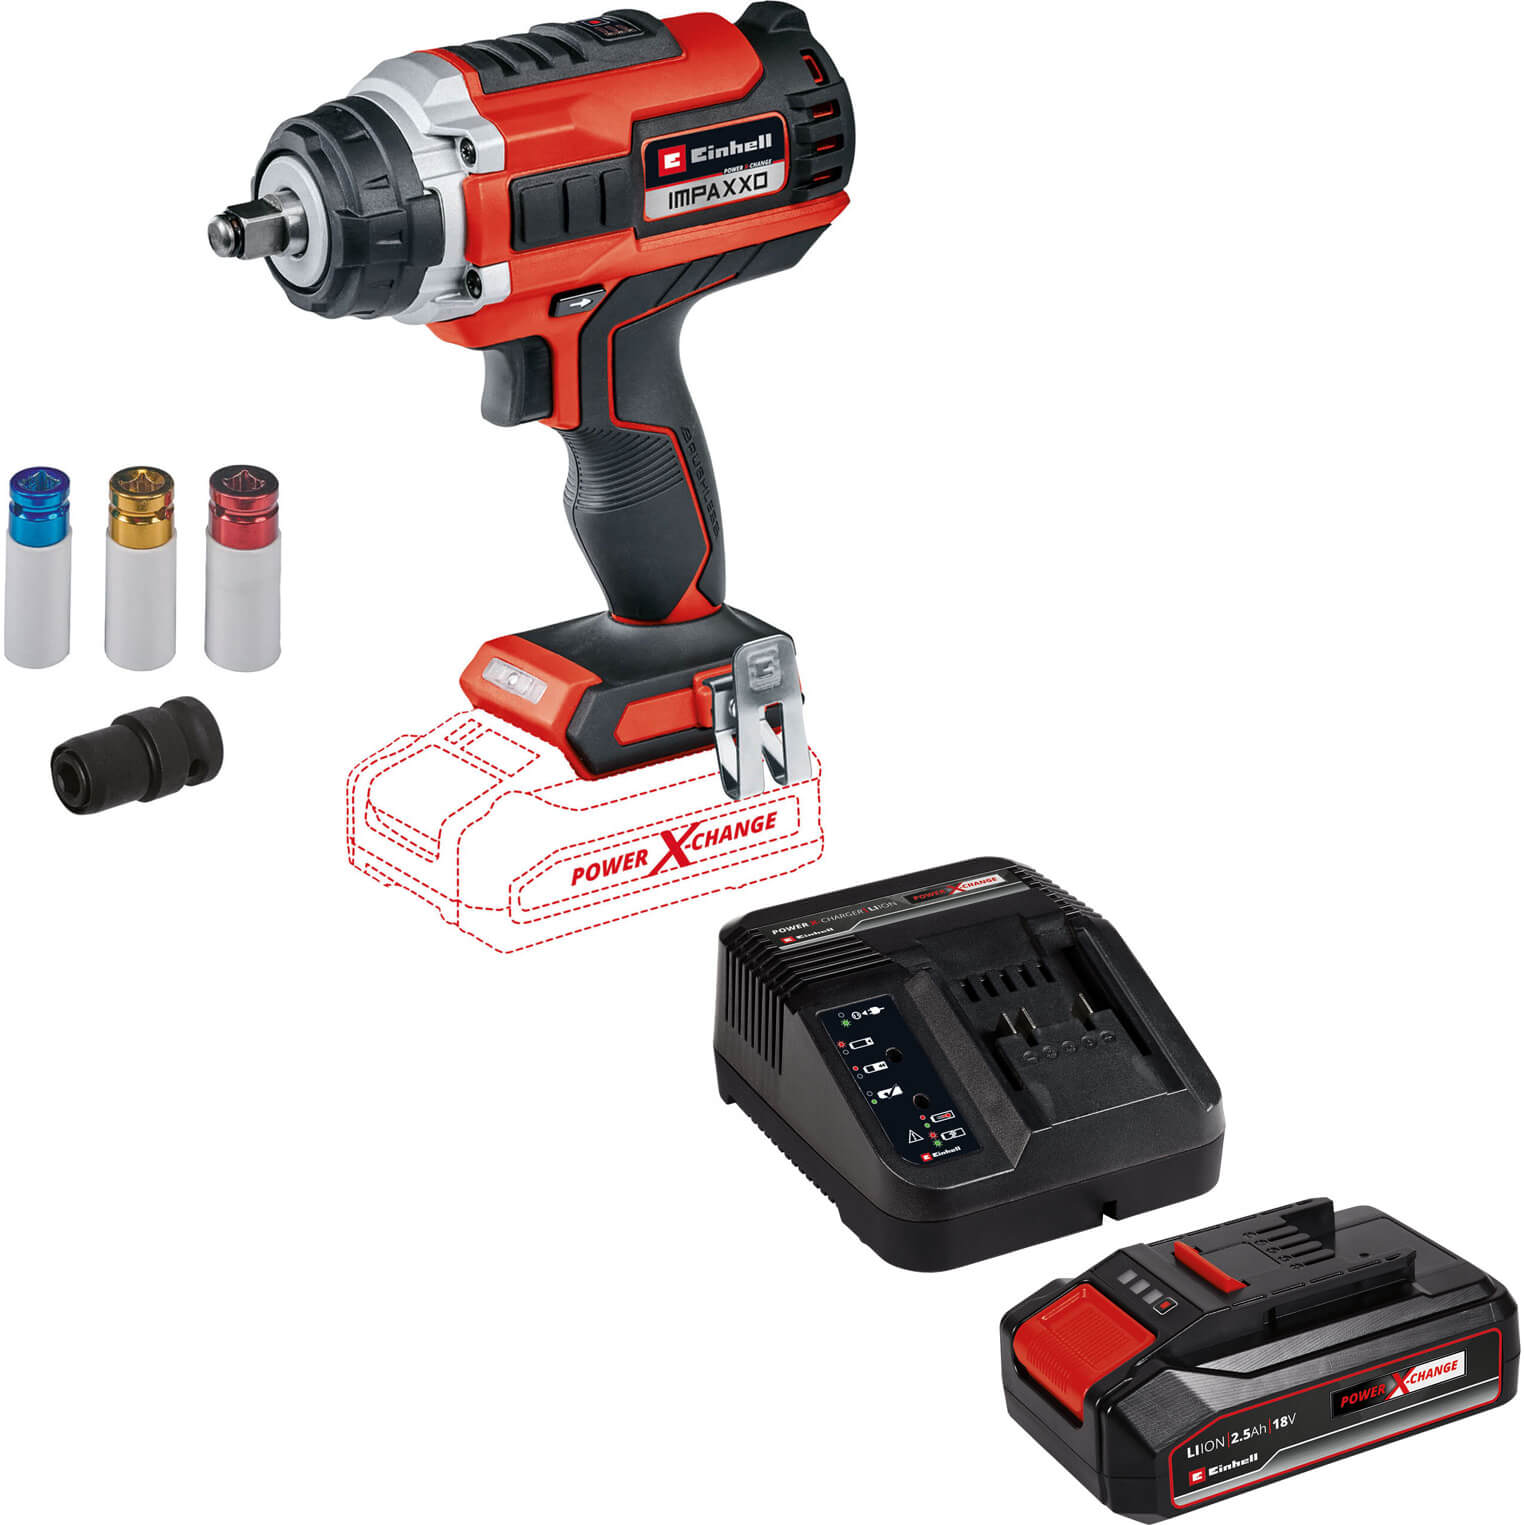 Image of Einhell IMPAXXO 18/400 18v Cordless Brushless 1/2" Impact Wrench 1 x 2.5ah Li-ion Charger No Case